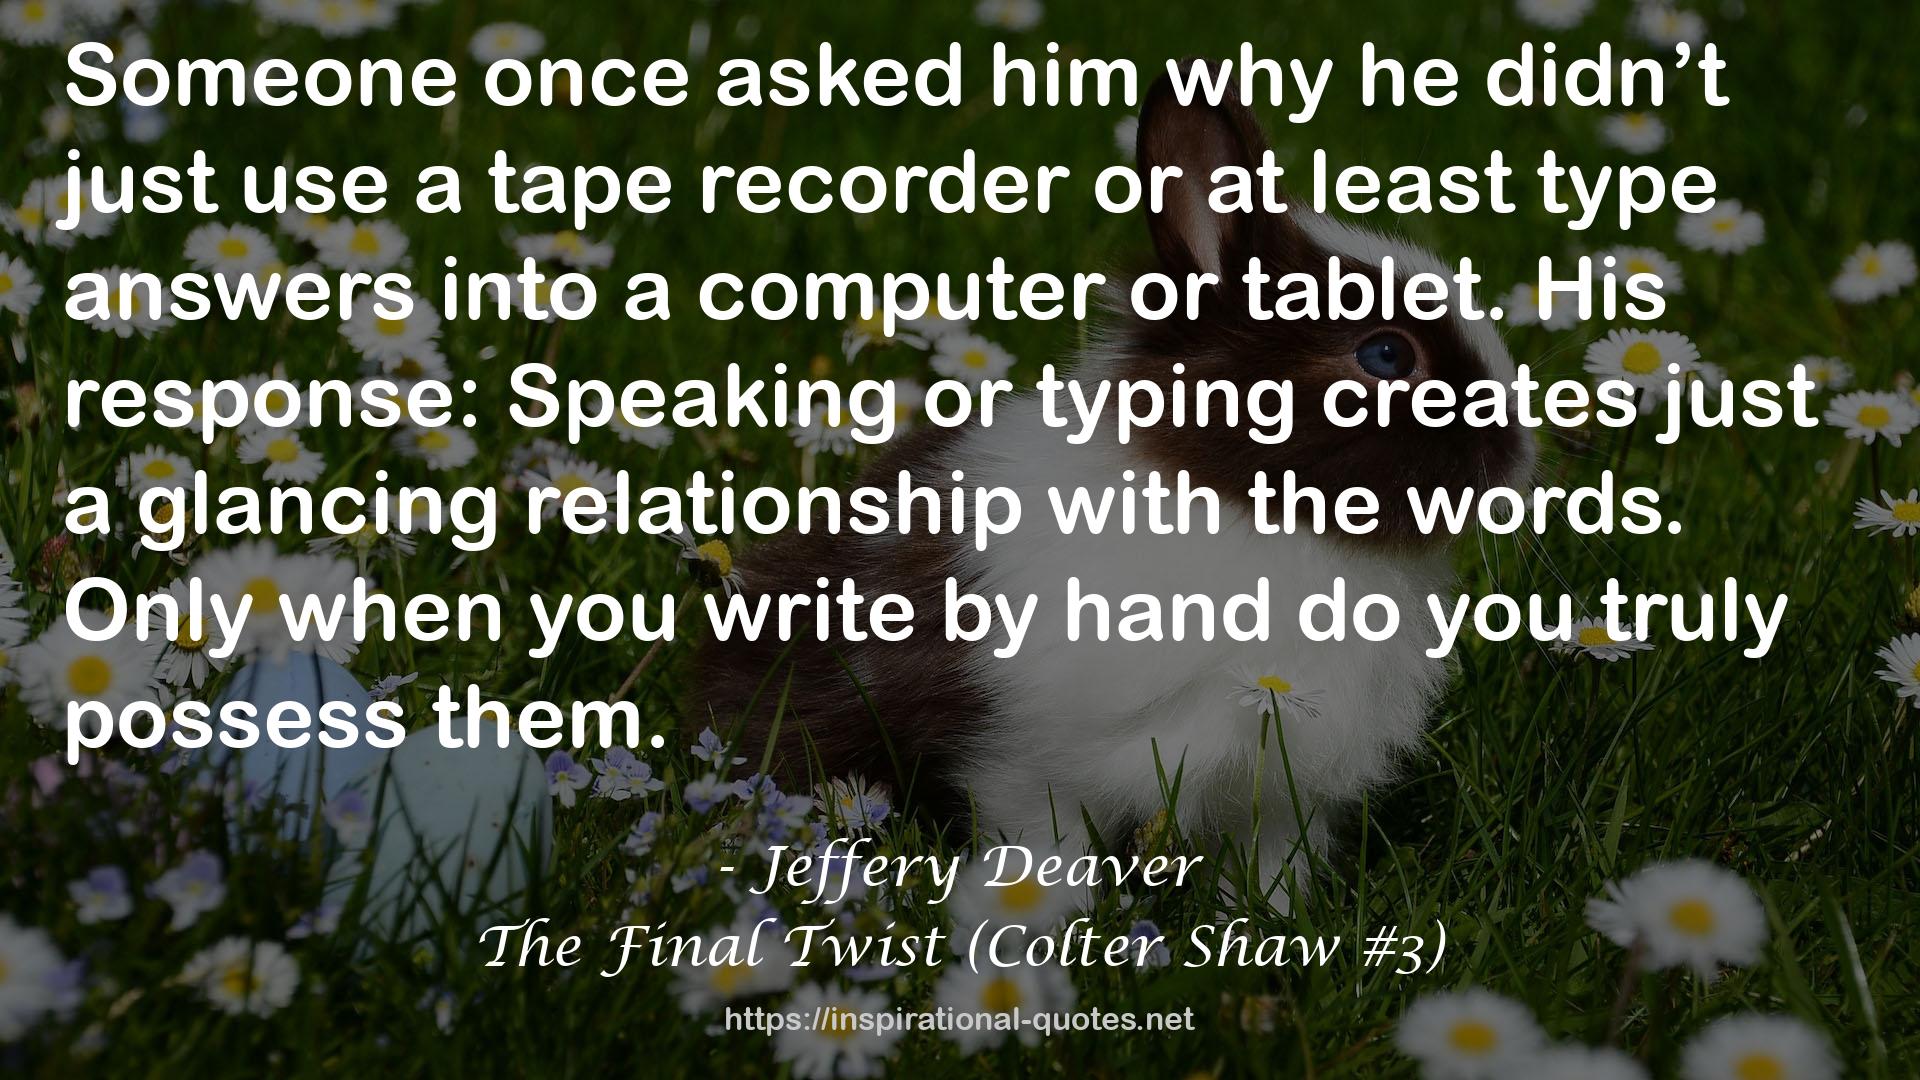 The Final Twist (Colter Shaw #3) QUOTES